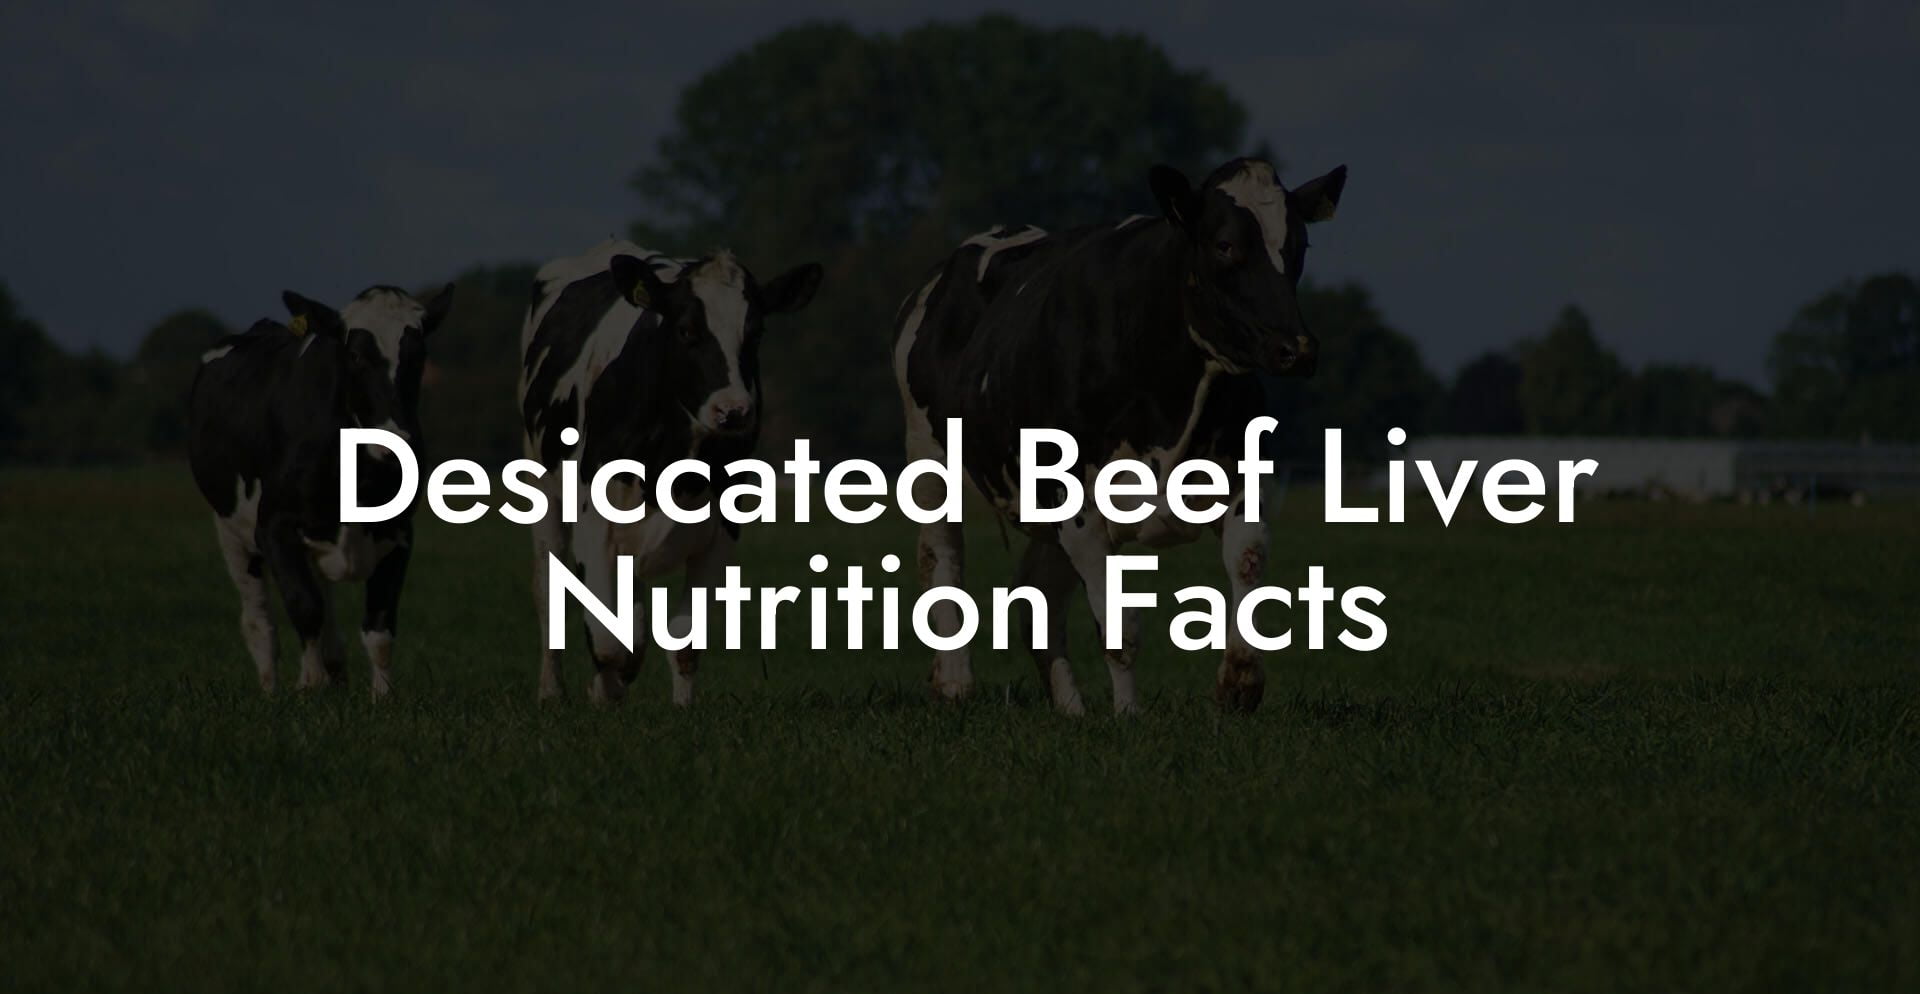 Desiccated Beef Liver Nutrition Facts